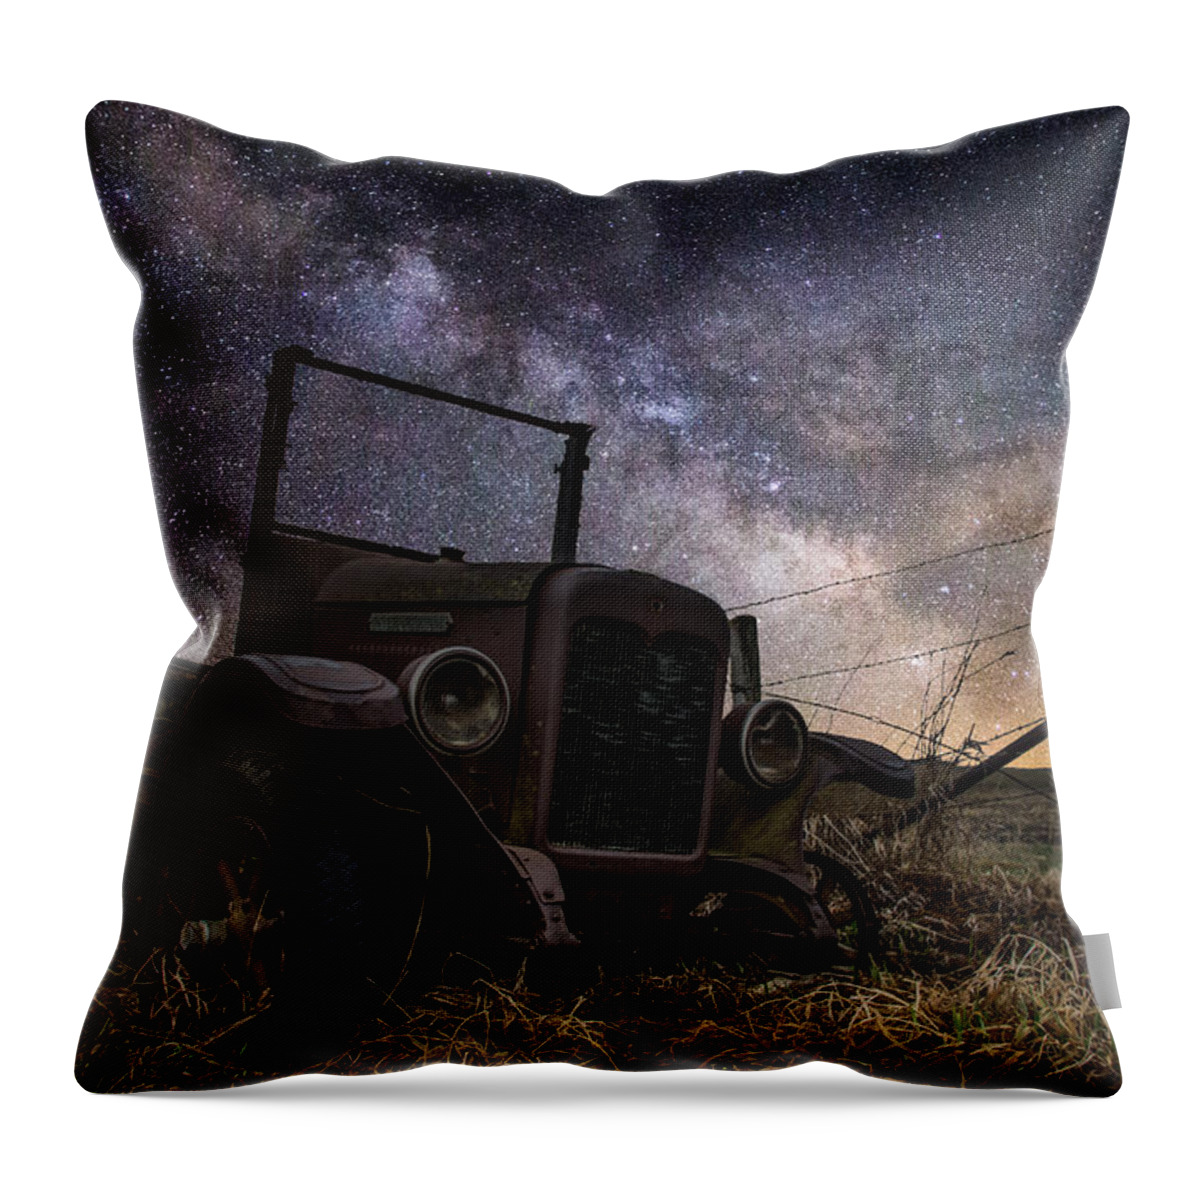 Stars Throw Pillow featuring the digital art Stardust and Rust by Aaron J Groen